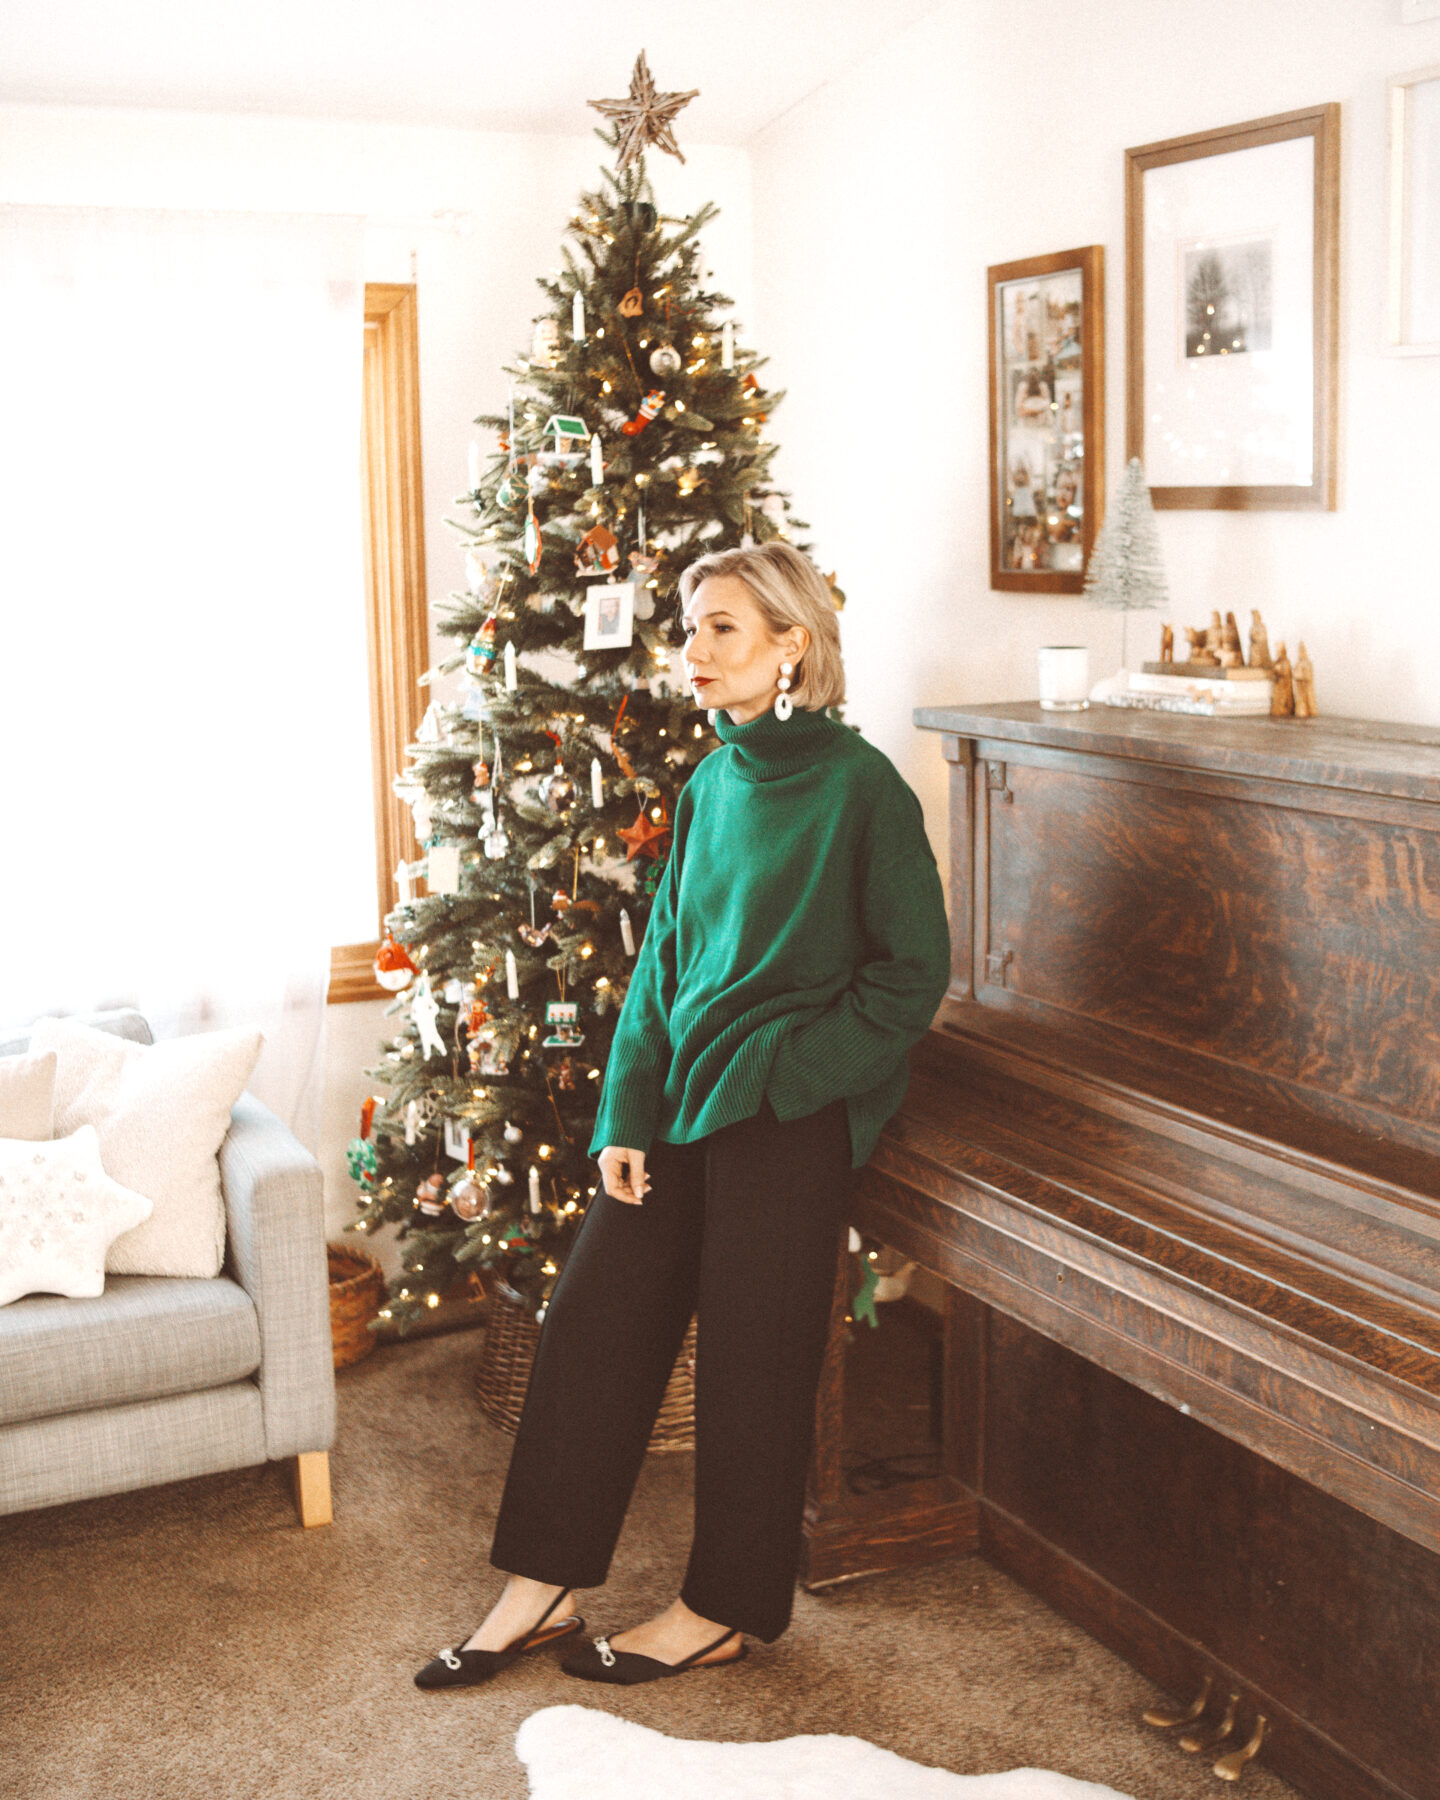 Karin Emily wears a holiday party outfit with a green sweater, black pants, and jeweled flats in front of her Christmas tree